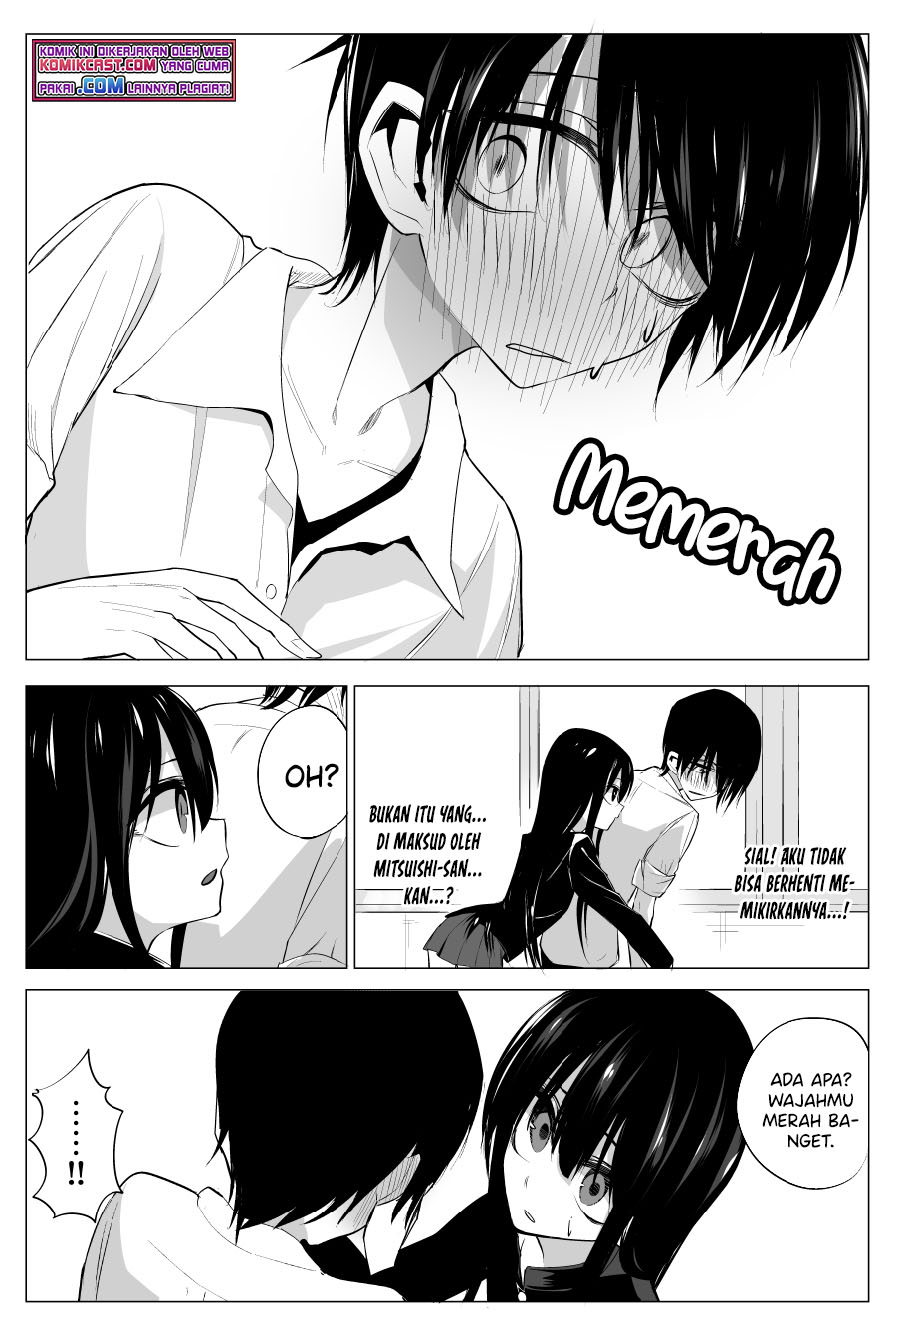 Mitsuishi-san is Being Weird This Year Chapter 15